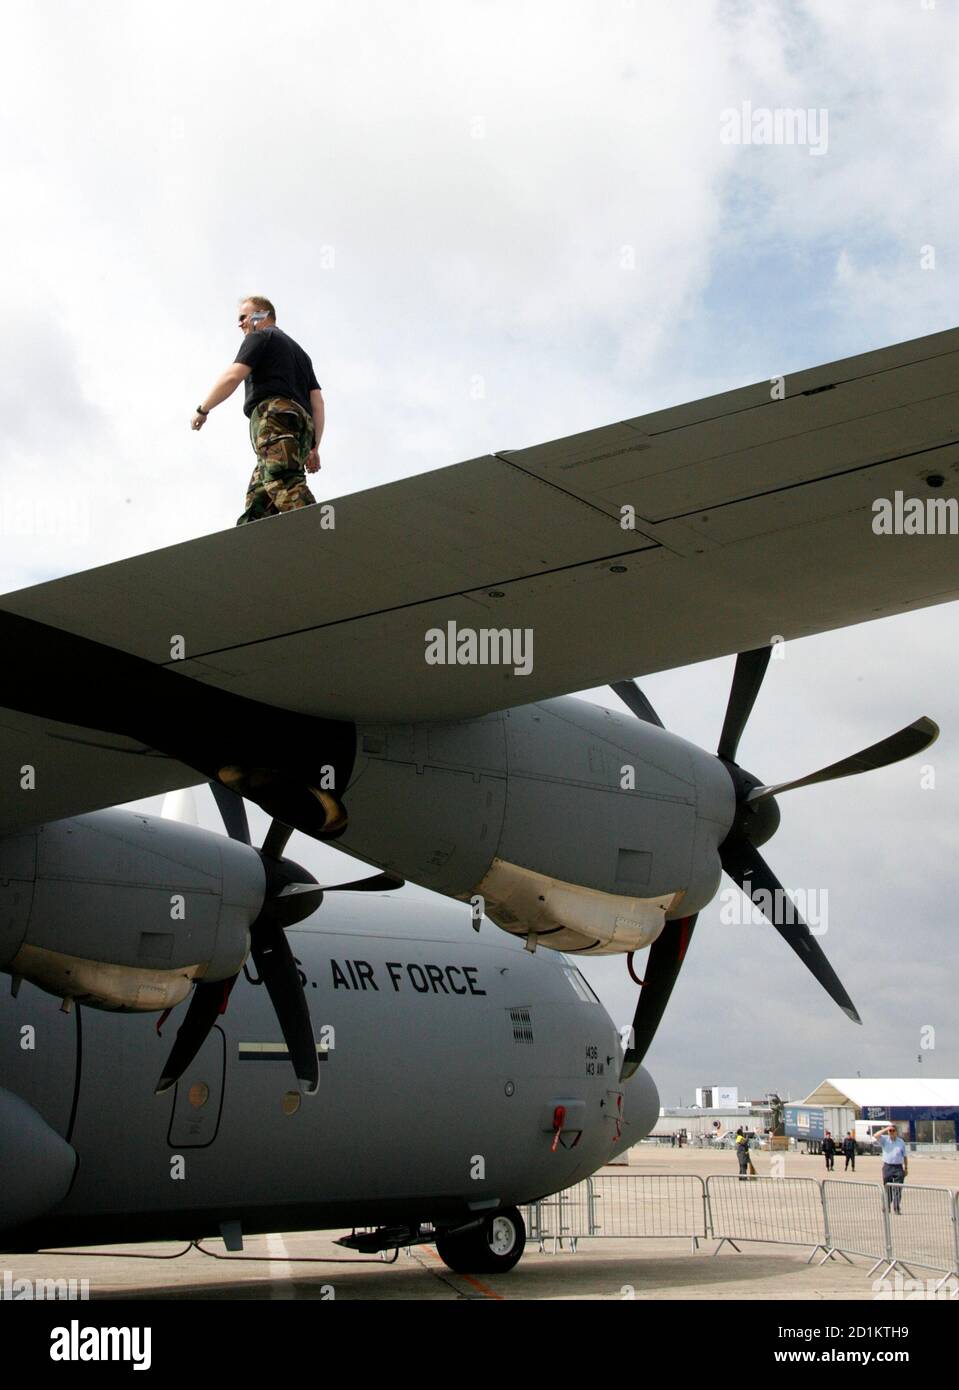 A U.S. airman from Rhode Island National Guard - 143rd Airlift Wing, walks on the wing a C-130 J aircraft, three days before the opening of the 47th Paris Air Show at Le Bourget airport near Paris, June 15, 2007.    REUTERS/Pascal Rossignol  (FRANCE) Stock Photo